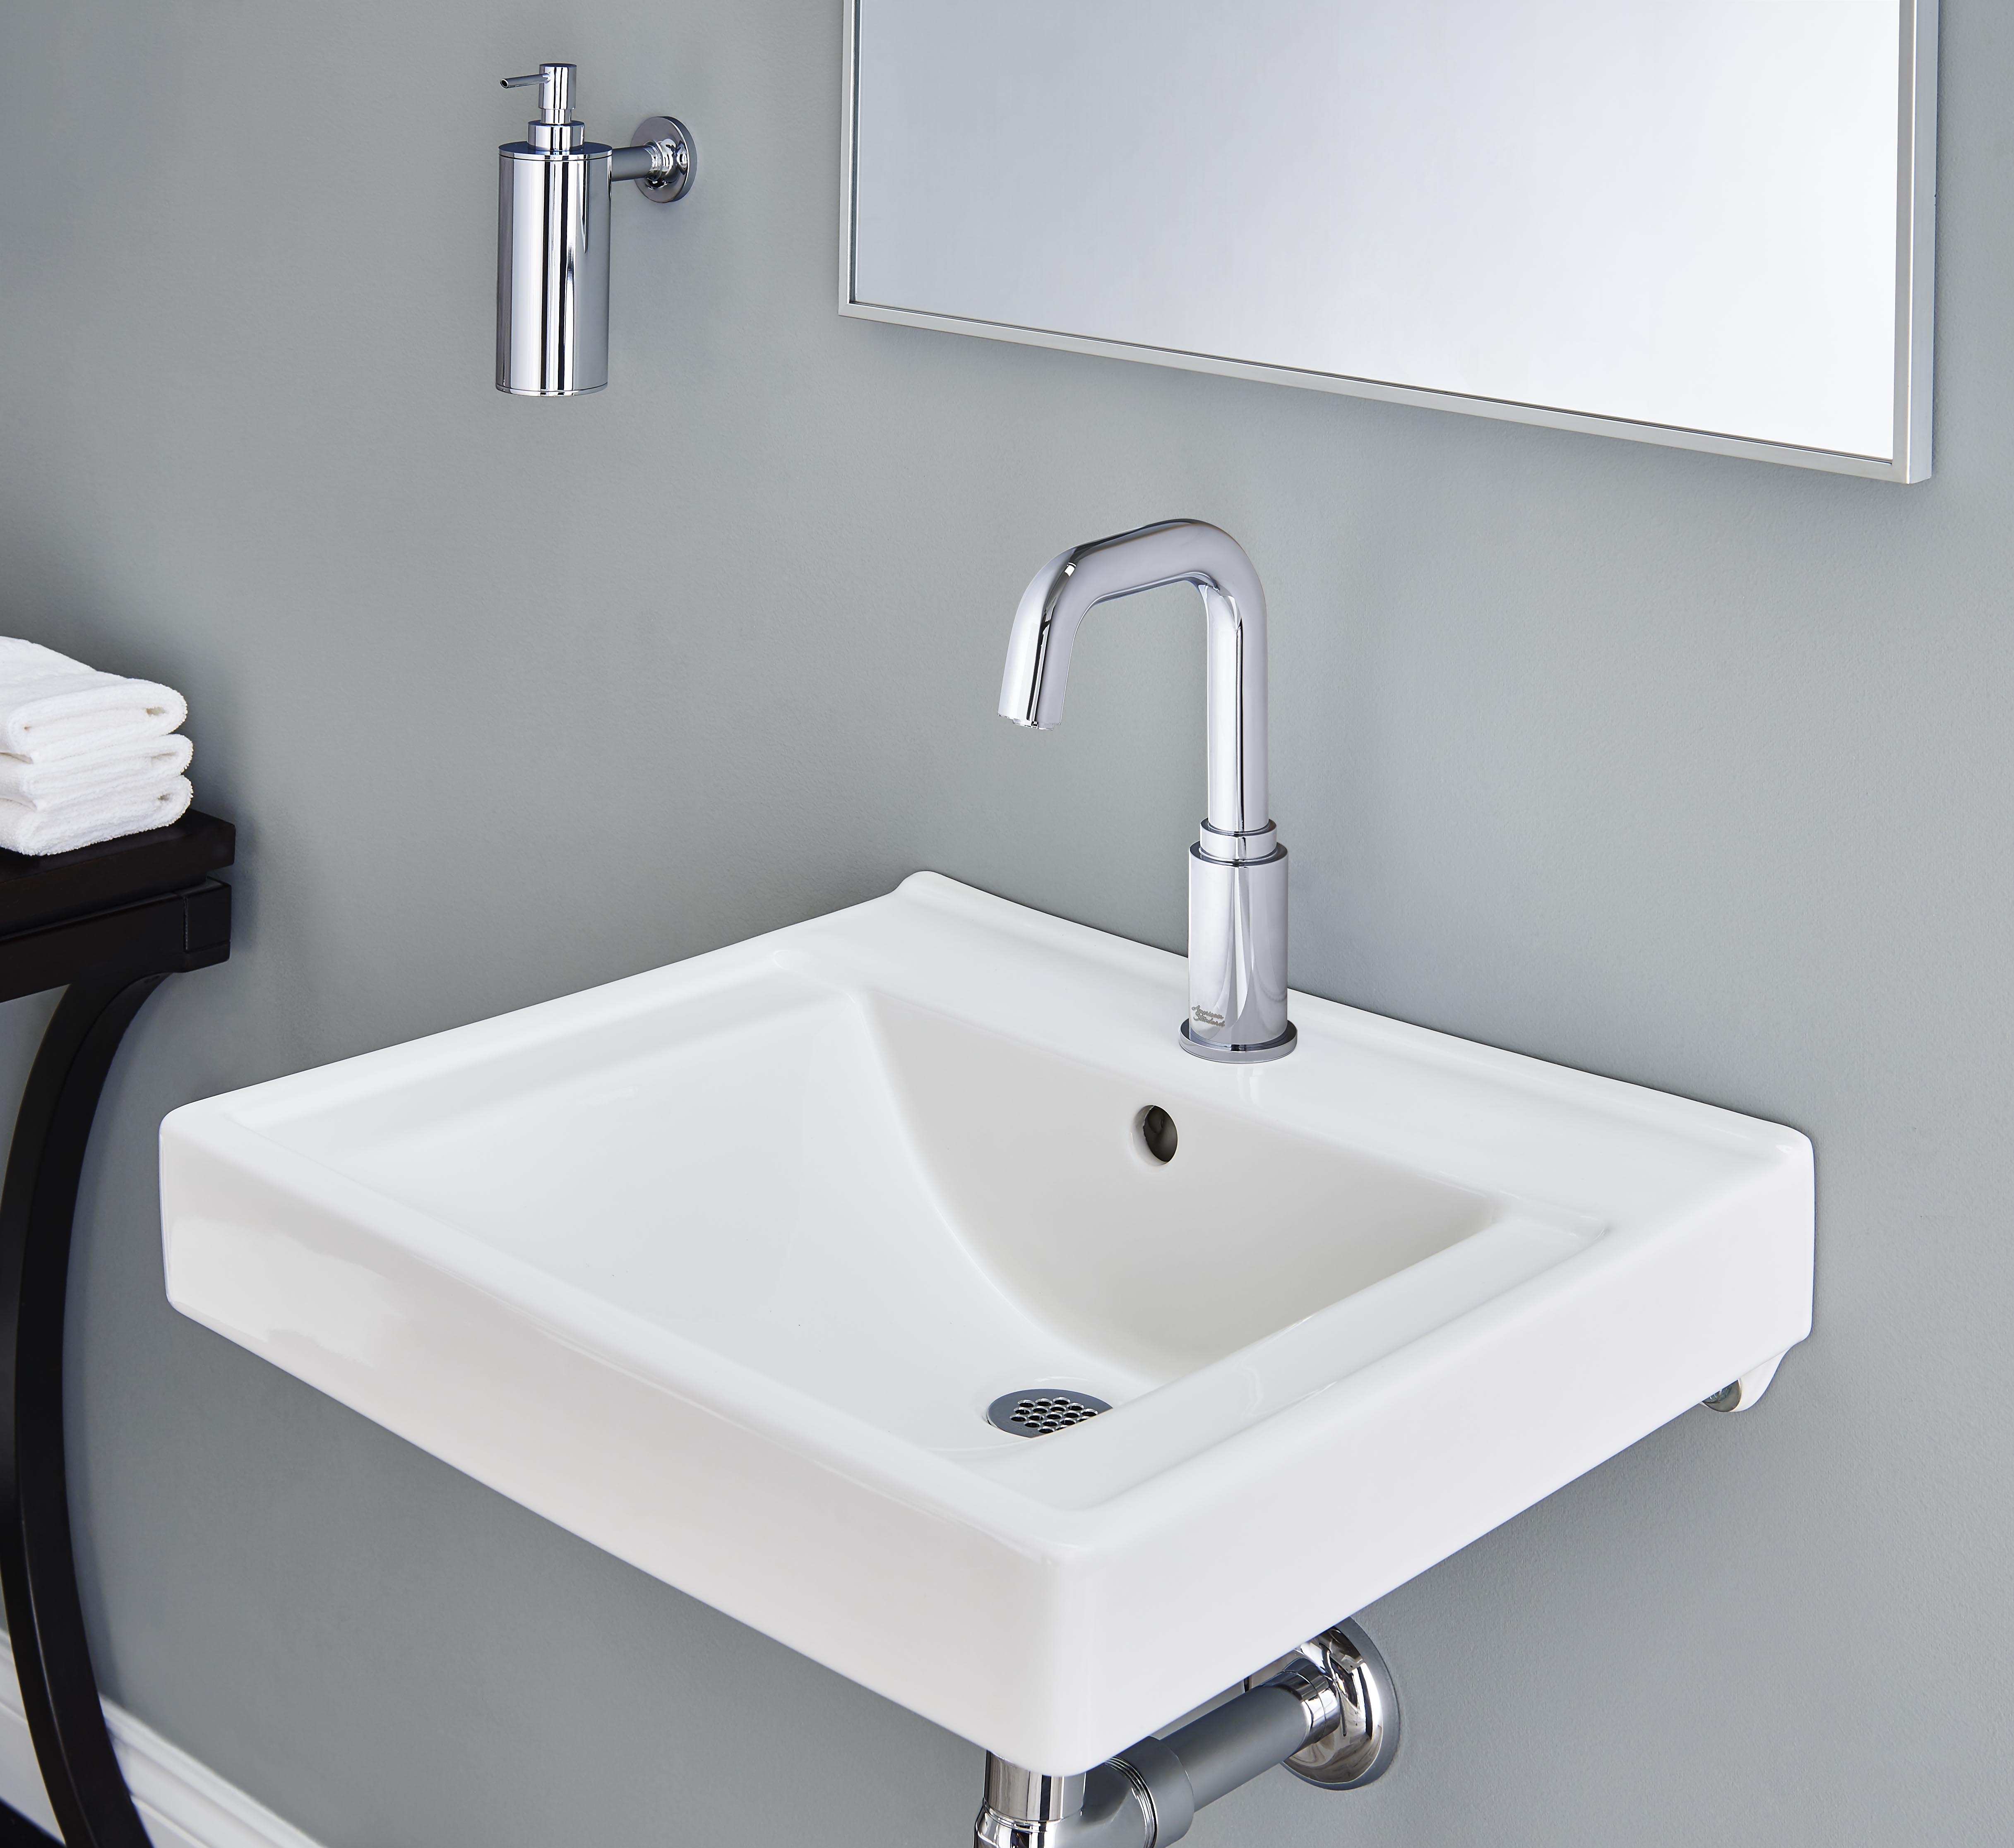 Serin™ Touchless Faucet, Base Model, 0.5 gpm/1.9 Lpm